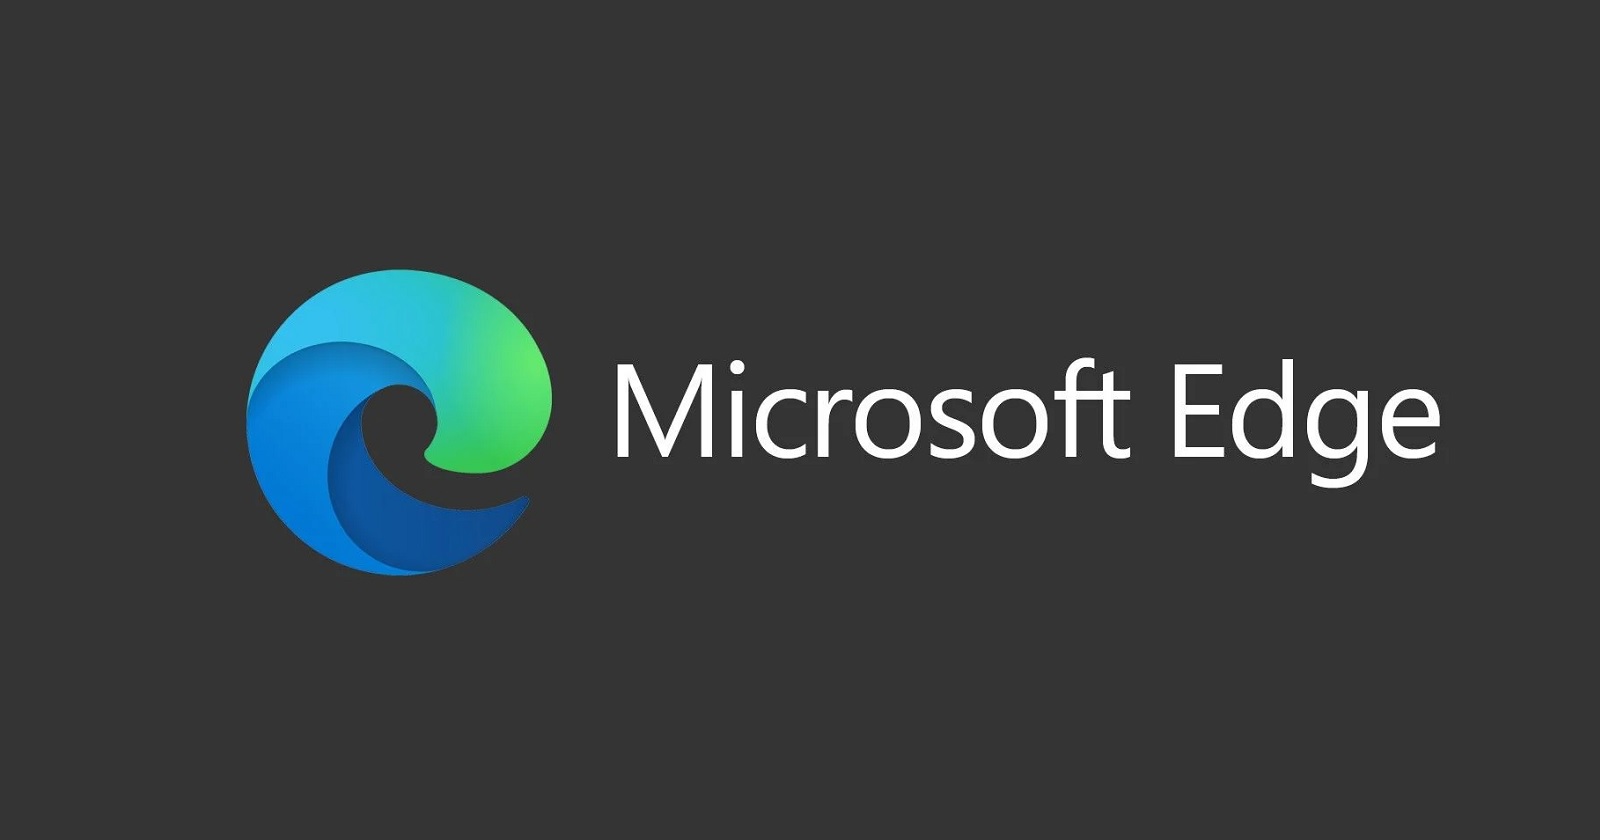 Microsoft working to unify Edge codebase on all platforms, mobile betas coming soon